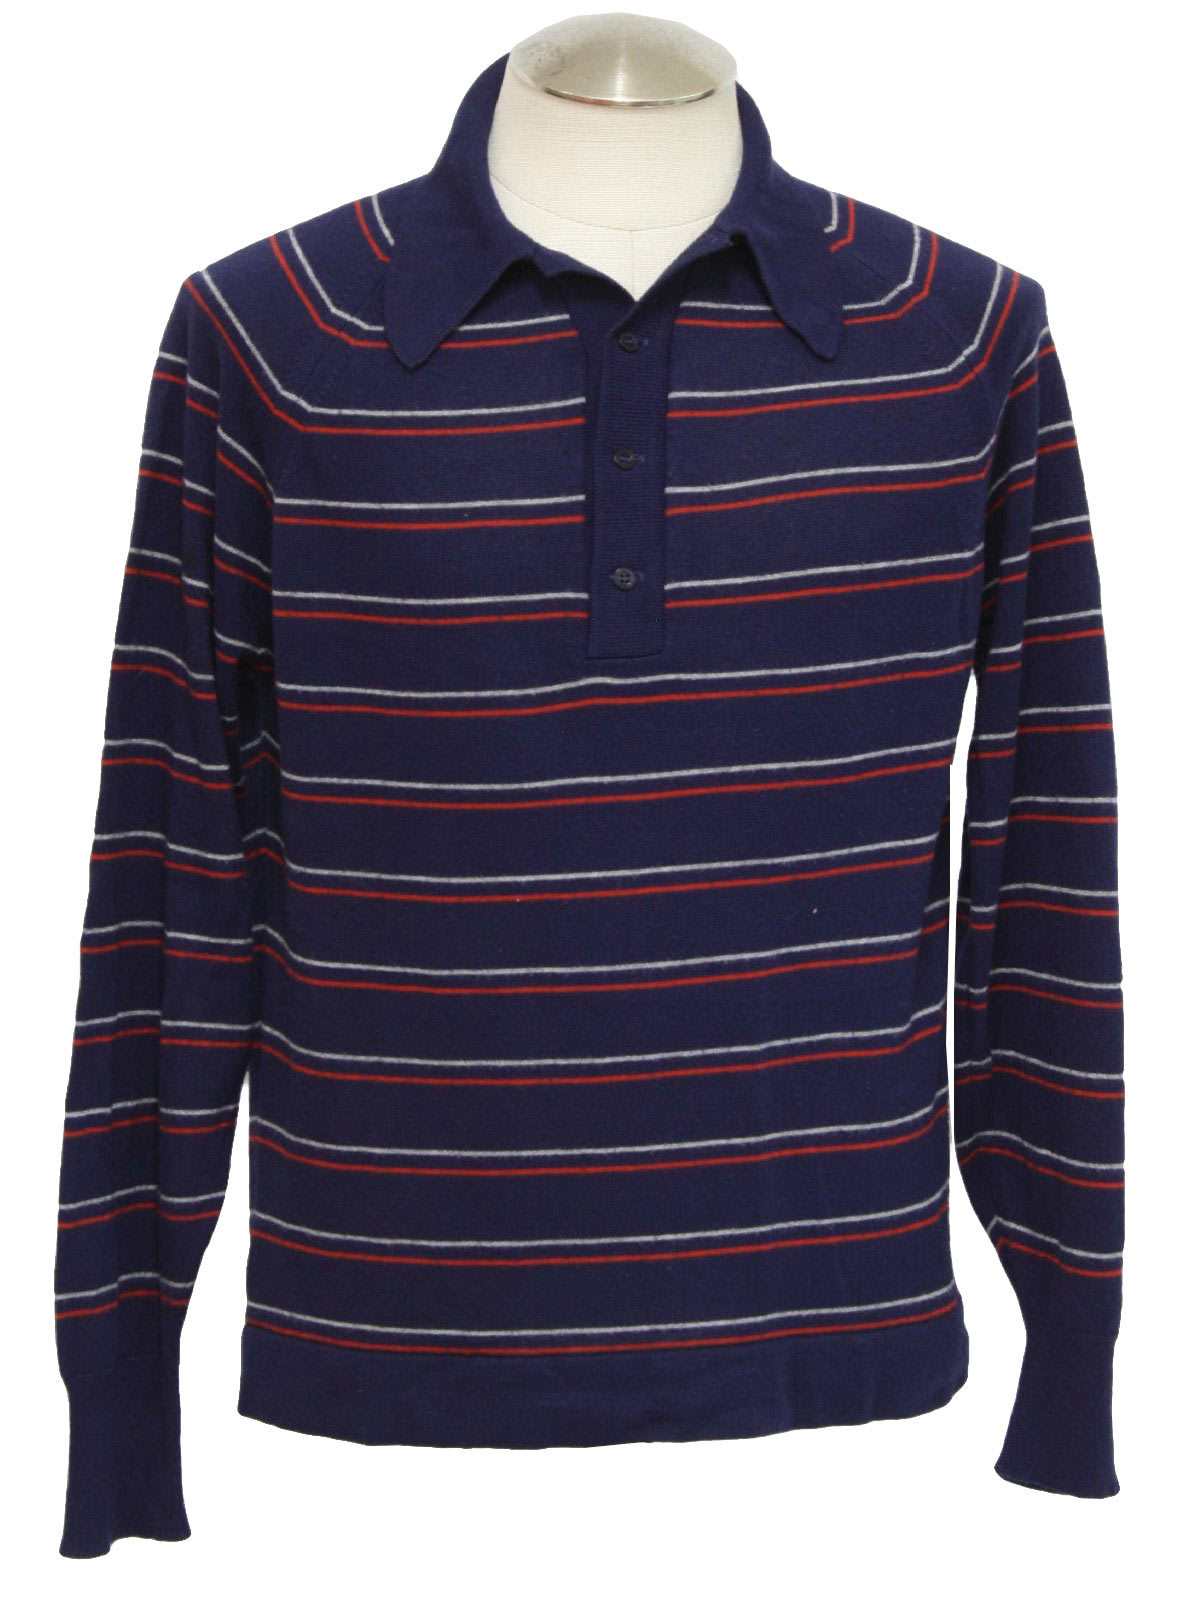 Retro 1970's Knit Shirt (Thane) : 70s -Thane- Mens navy blue, red and ...